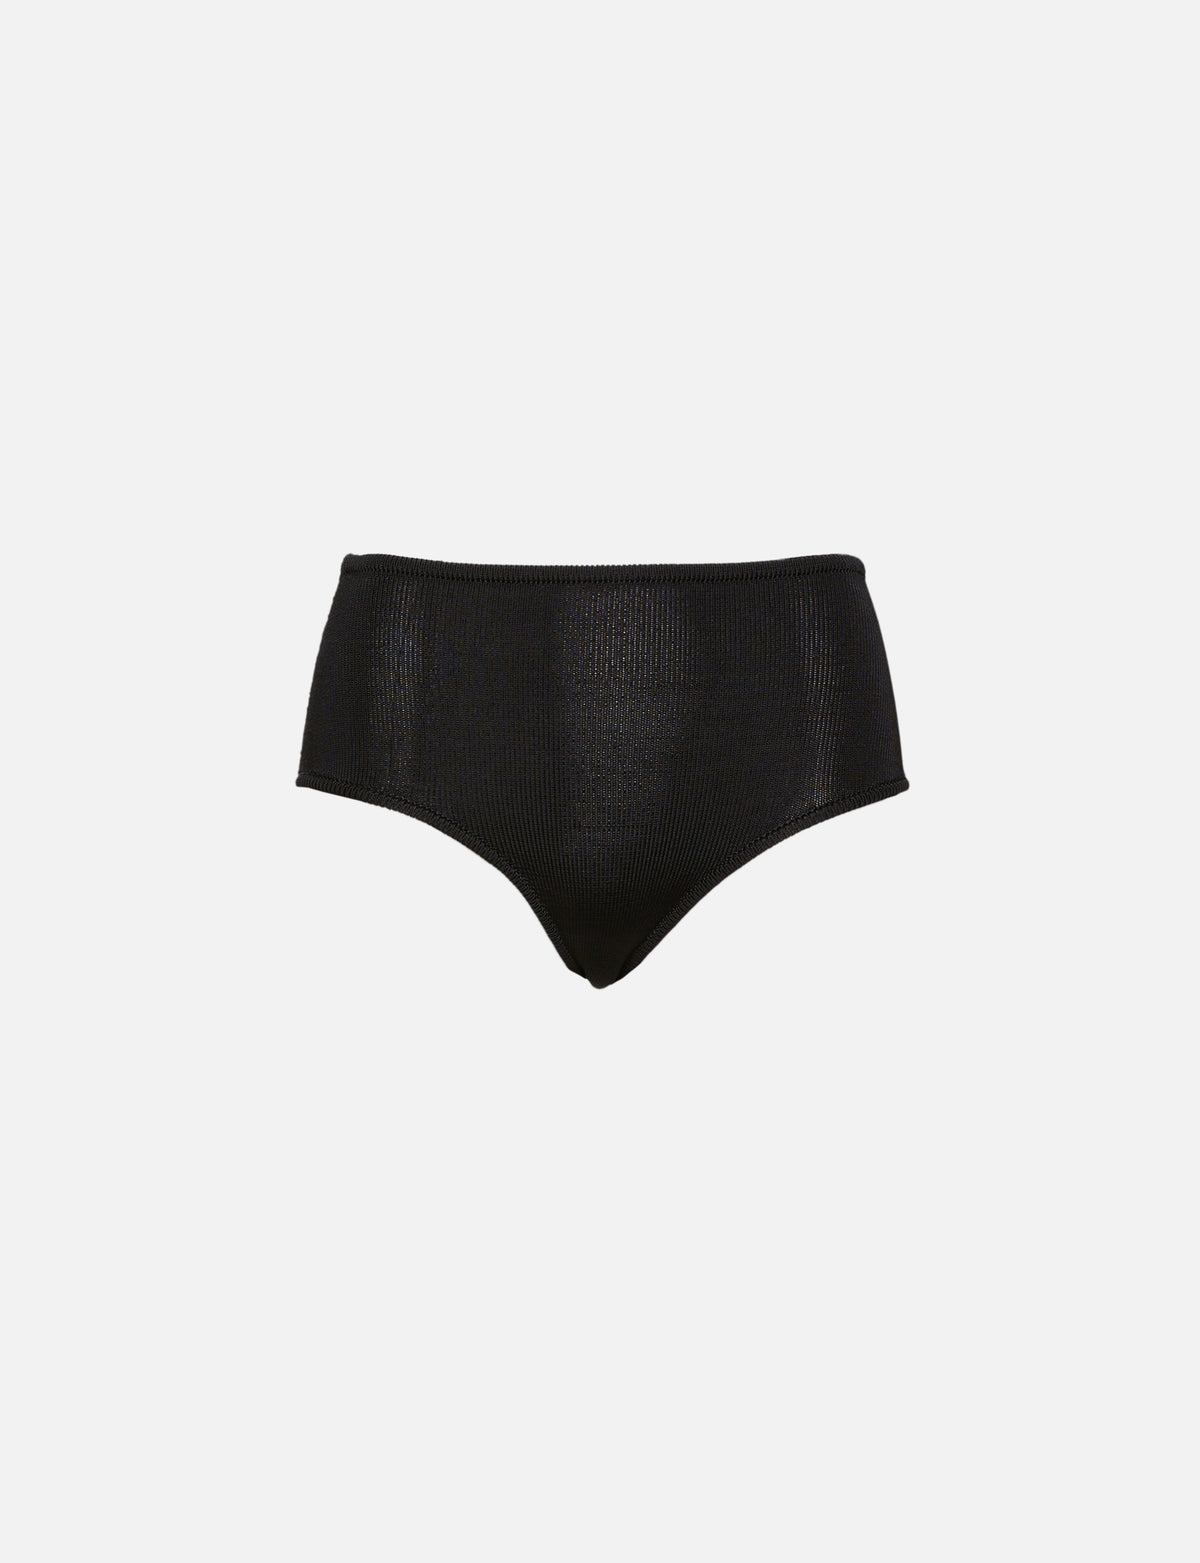 view 1 - Knit Brief